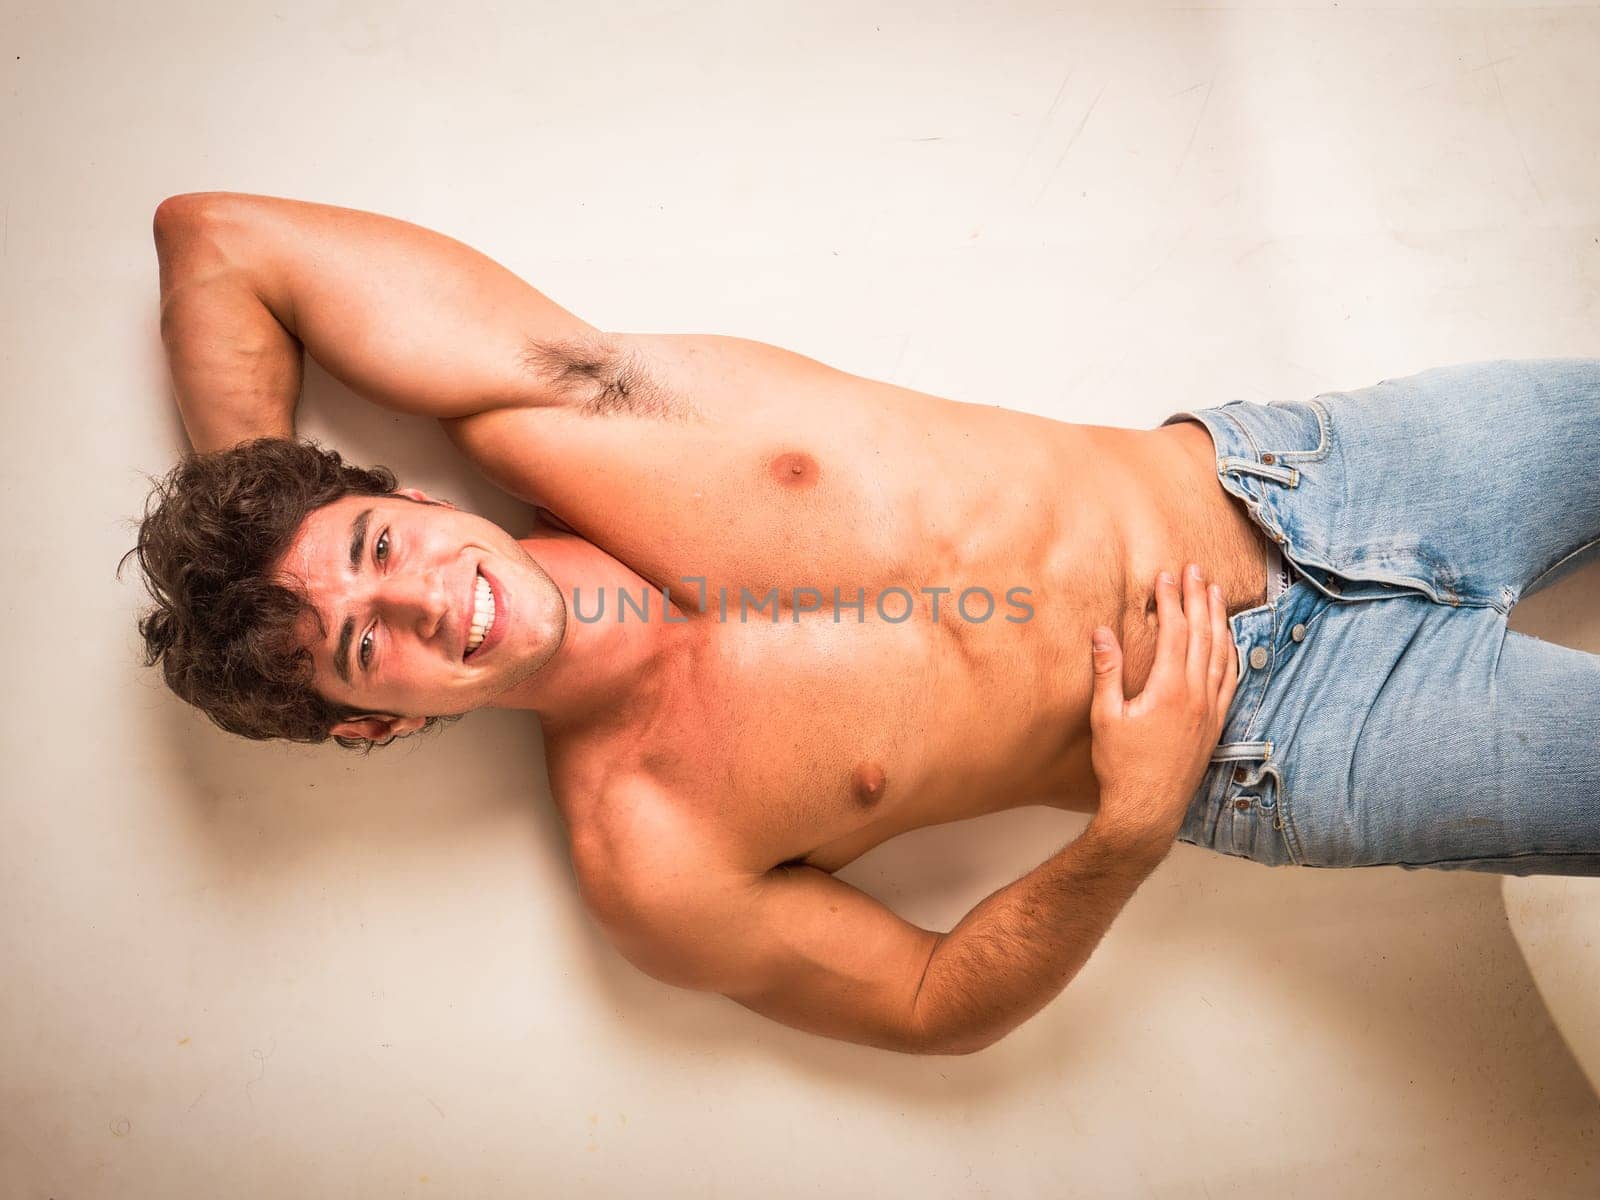 Handsome young bodybuilder laying down on the floor, looking up at the camera with a smile